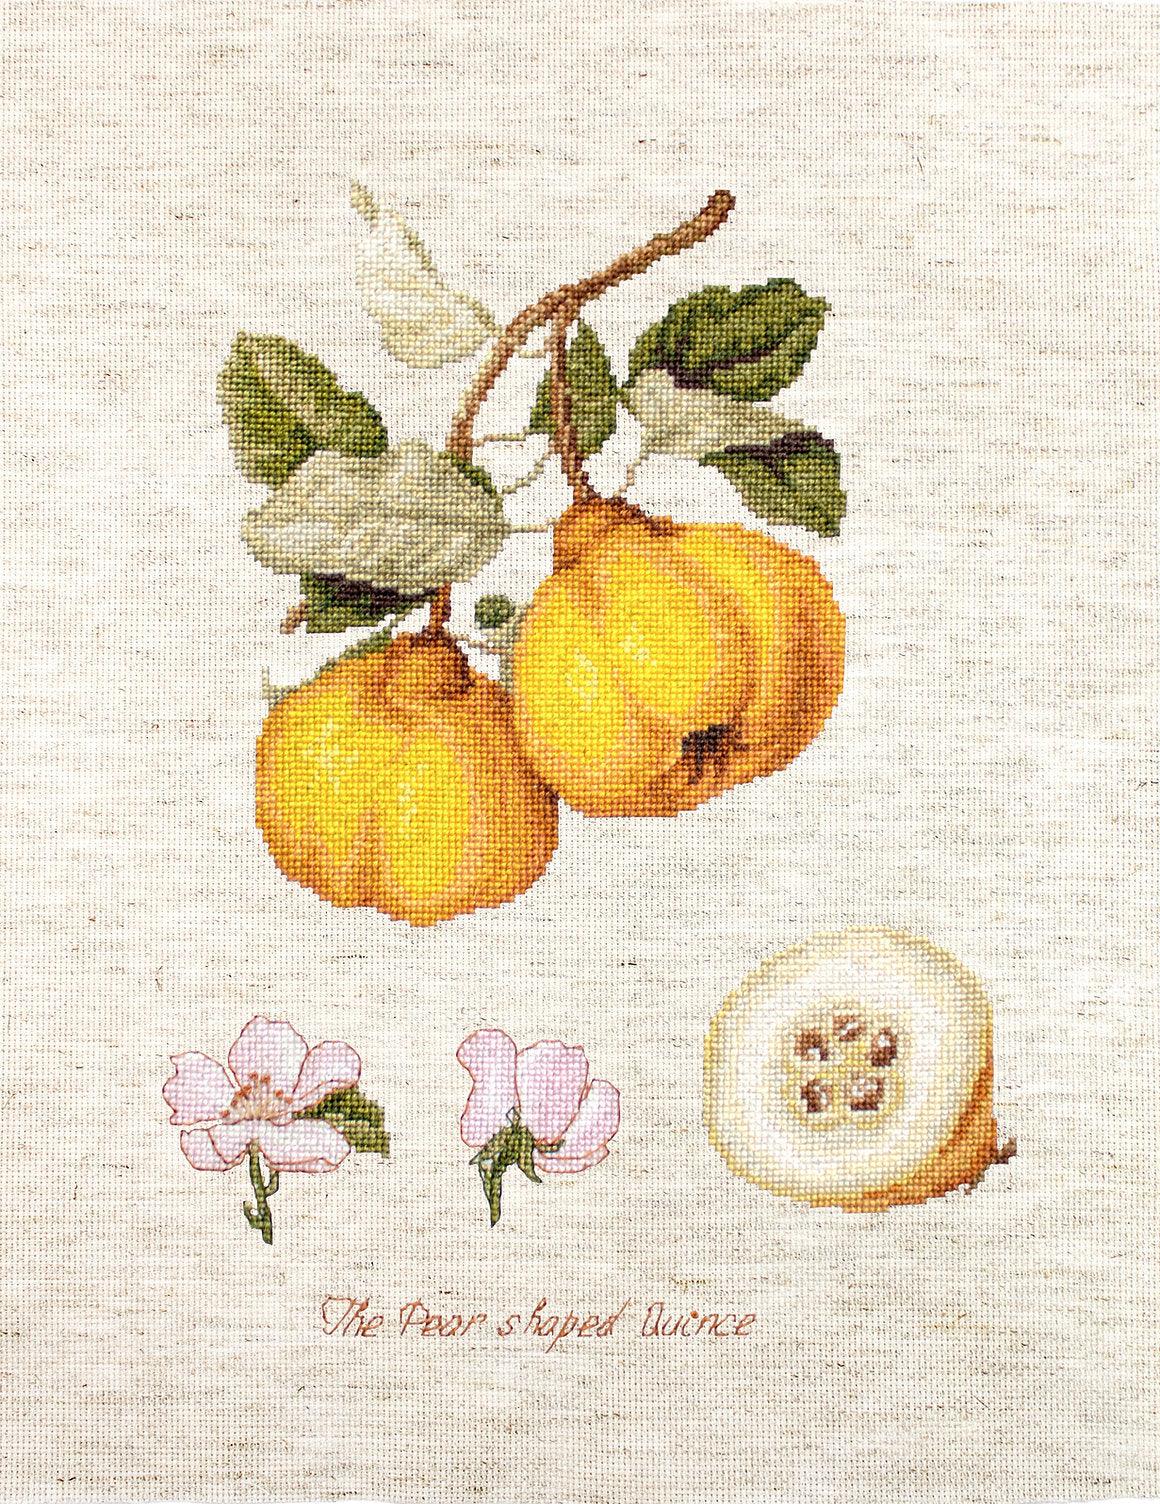 Cross Stitch Kit Luca-S - The Pear shaped Quince - Luca-S Cross Stitch Kits